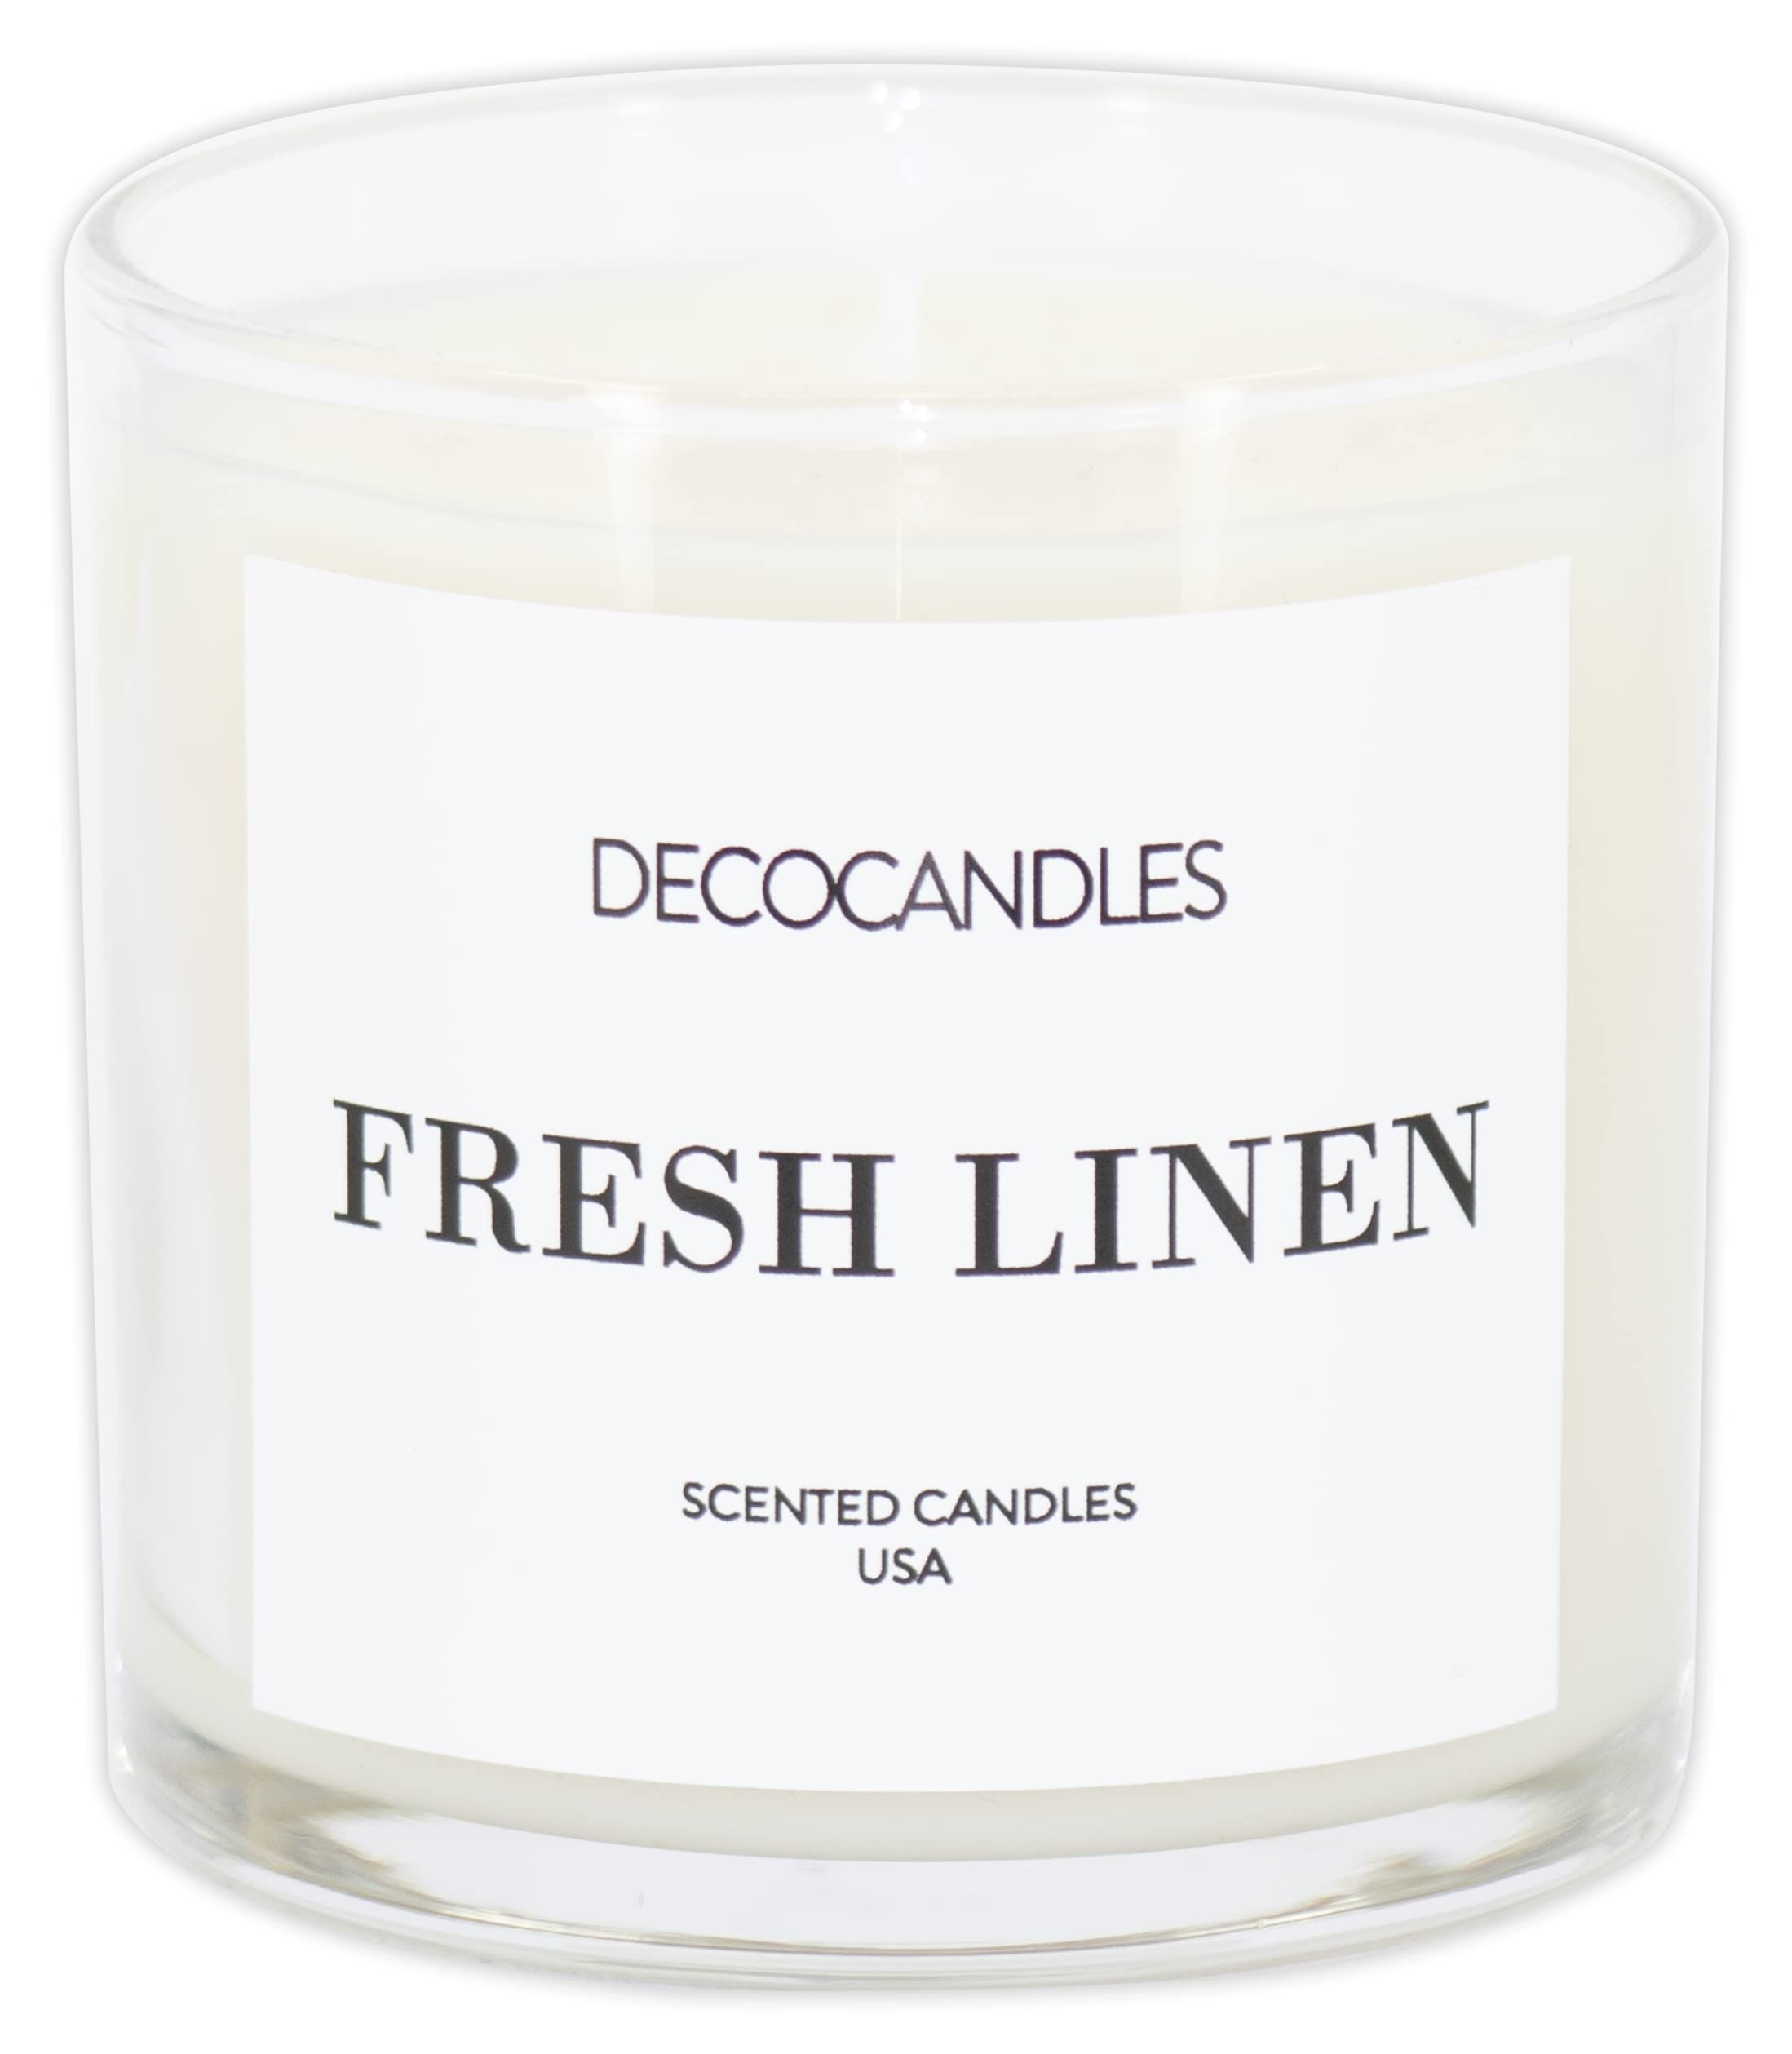 DECOCANDLES, Fresh Linen Scented Jar Candle, Handmade in USA, 6 oz. | Amazon (US)